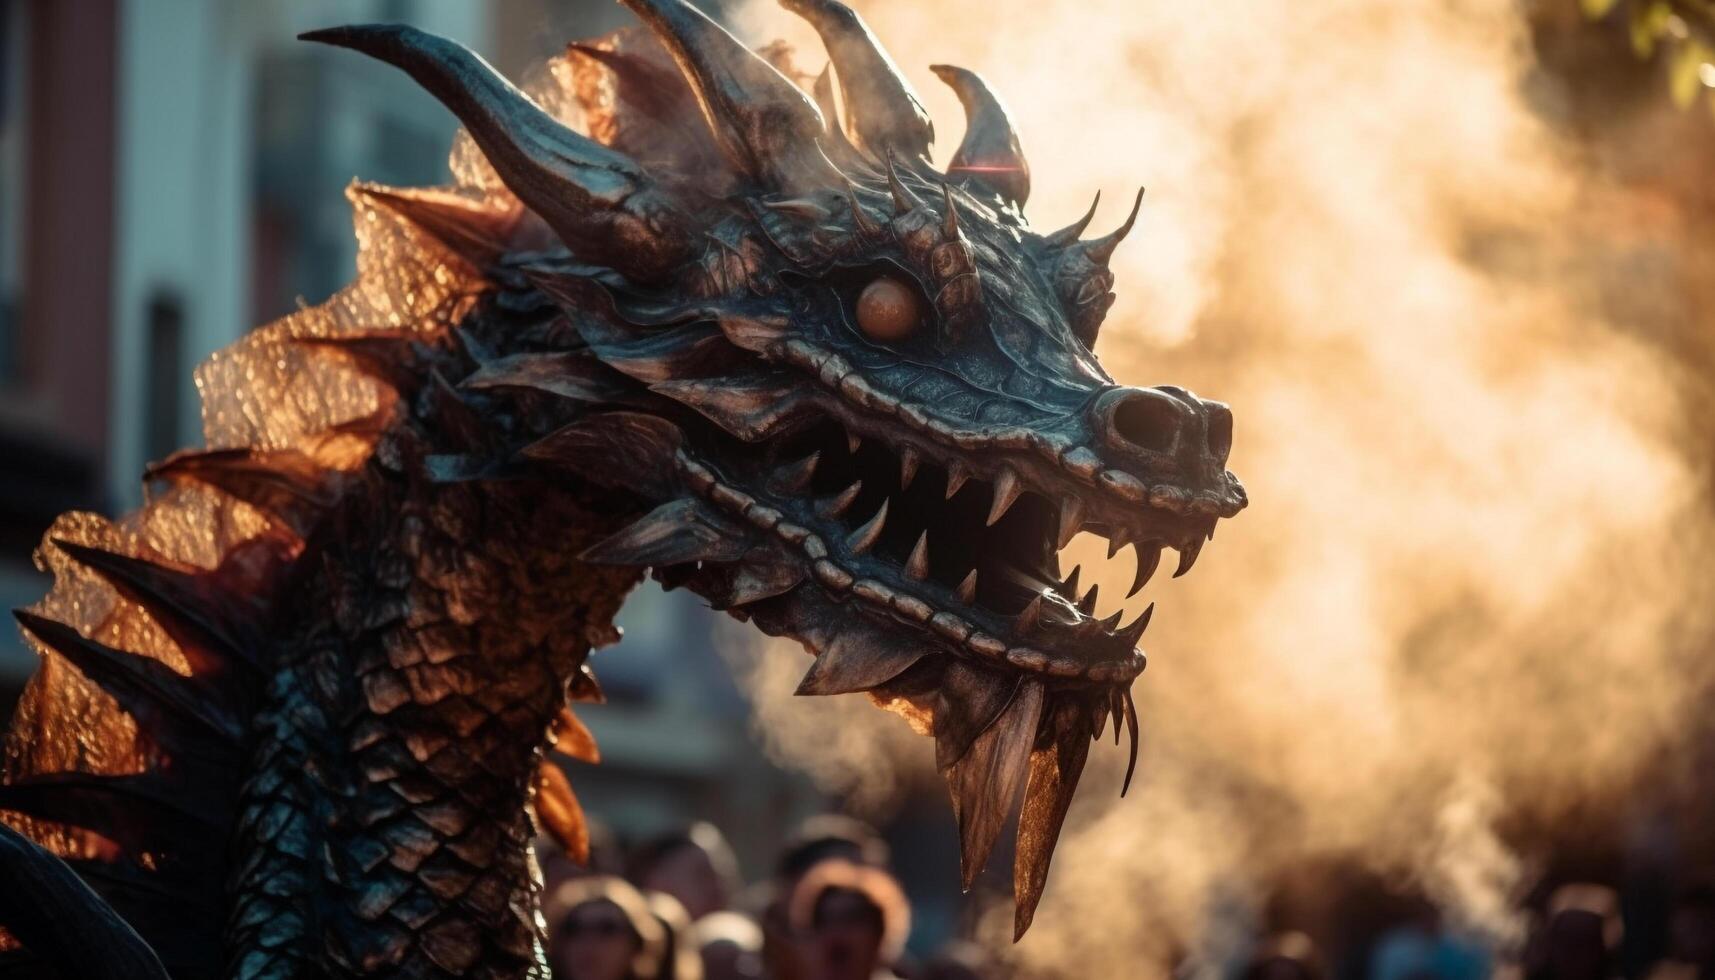 Dragon sculpture with horned animal head, teeth, and bizarre features generated by AI photo